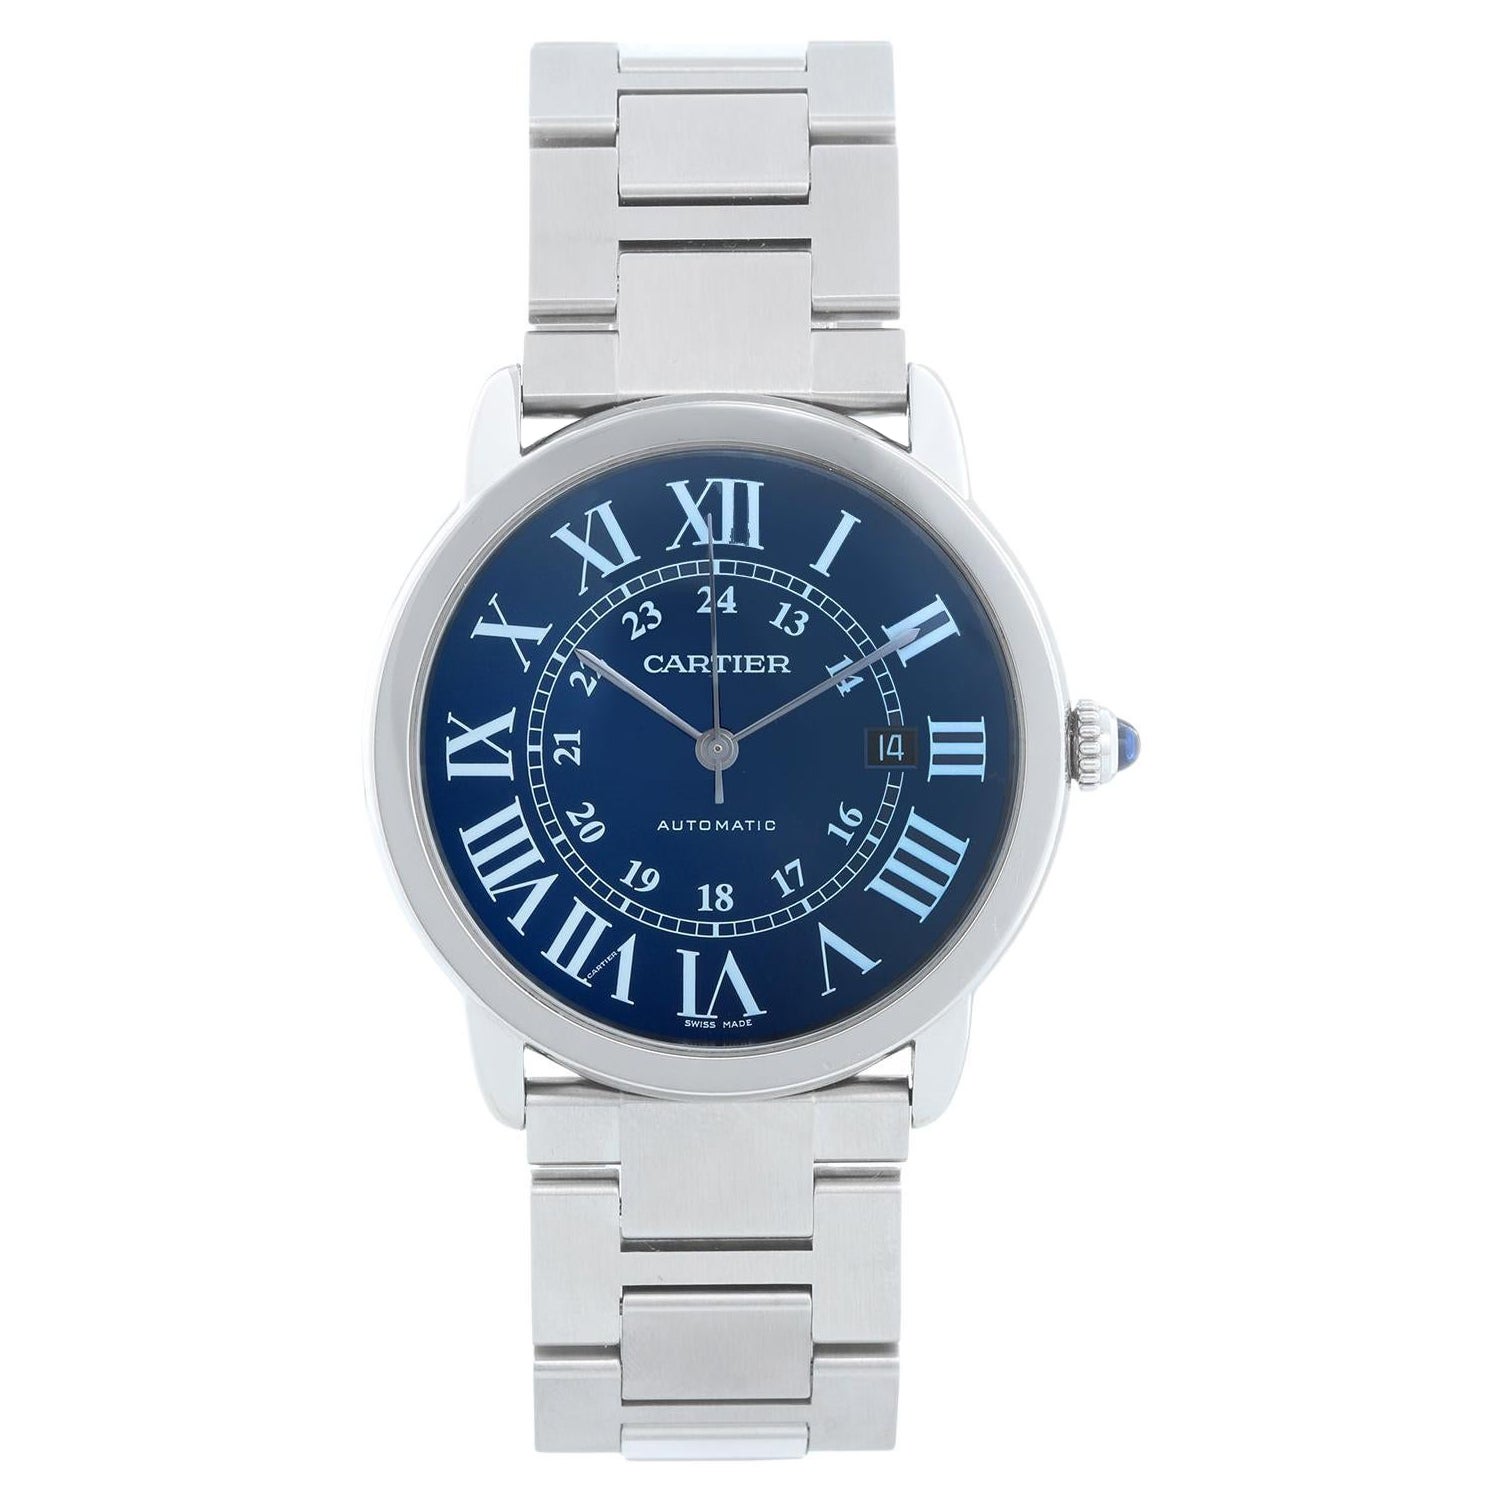 Cartier Solo Ronde Stainless Steel Quartz Watch WSRN0023 3802 For Sale